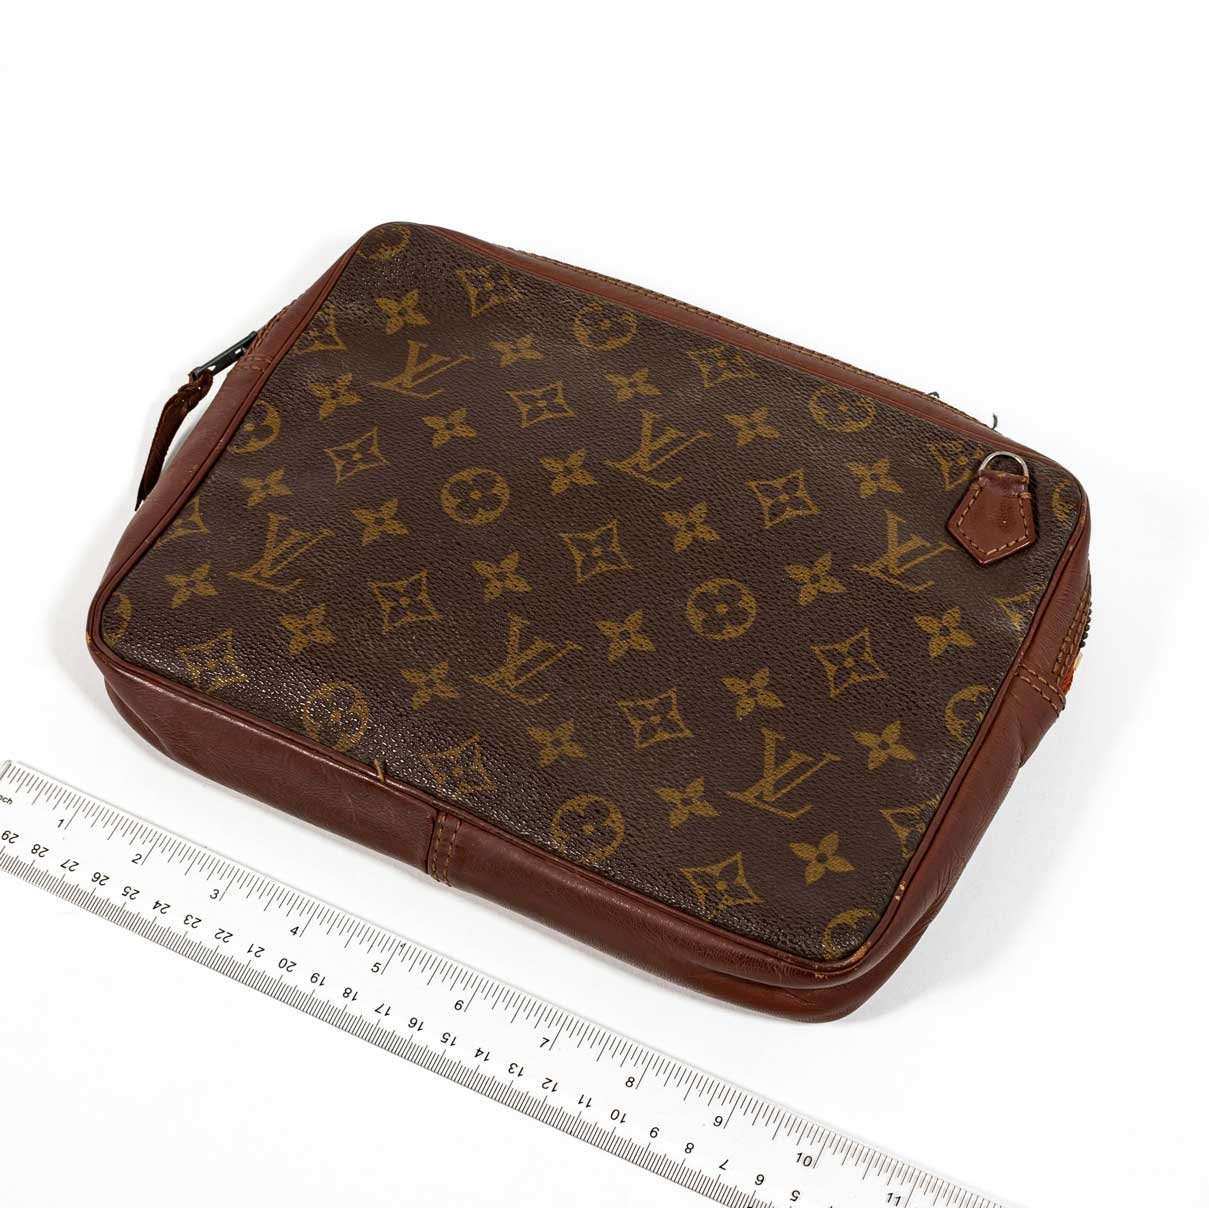 70's Louis Vuitton Clutch/Crossbody with Eclair Zipper Pull #2 - Quirk